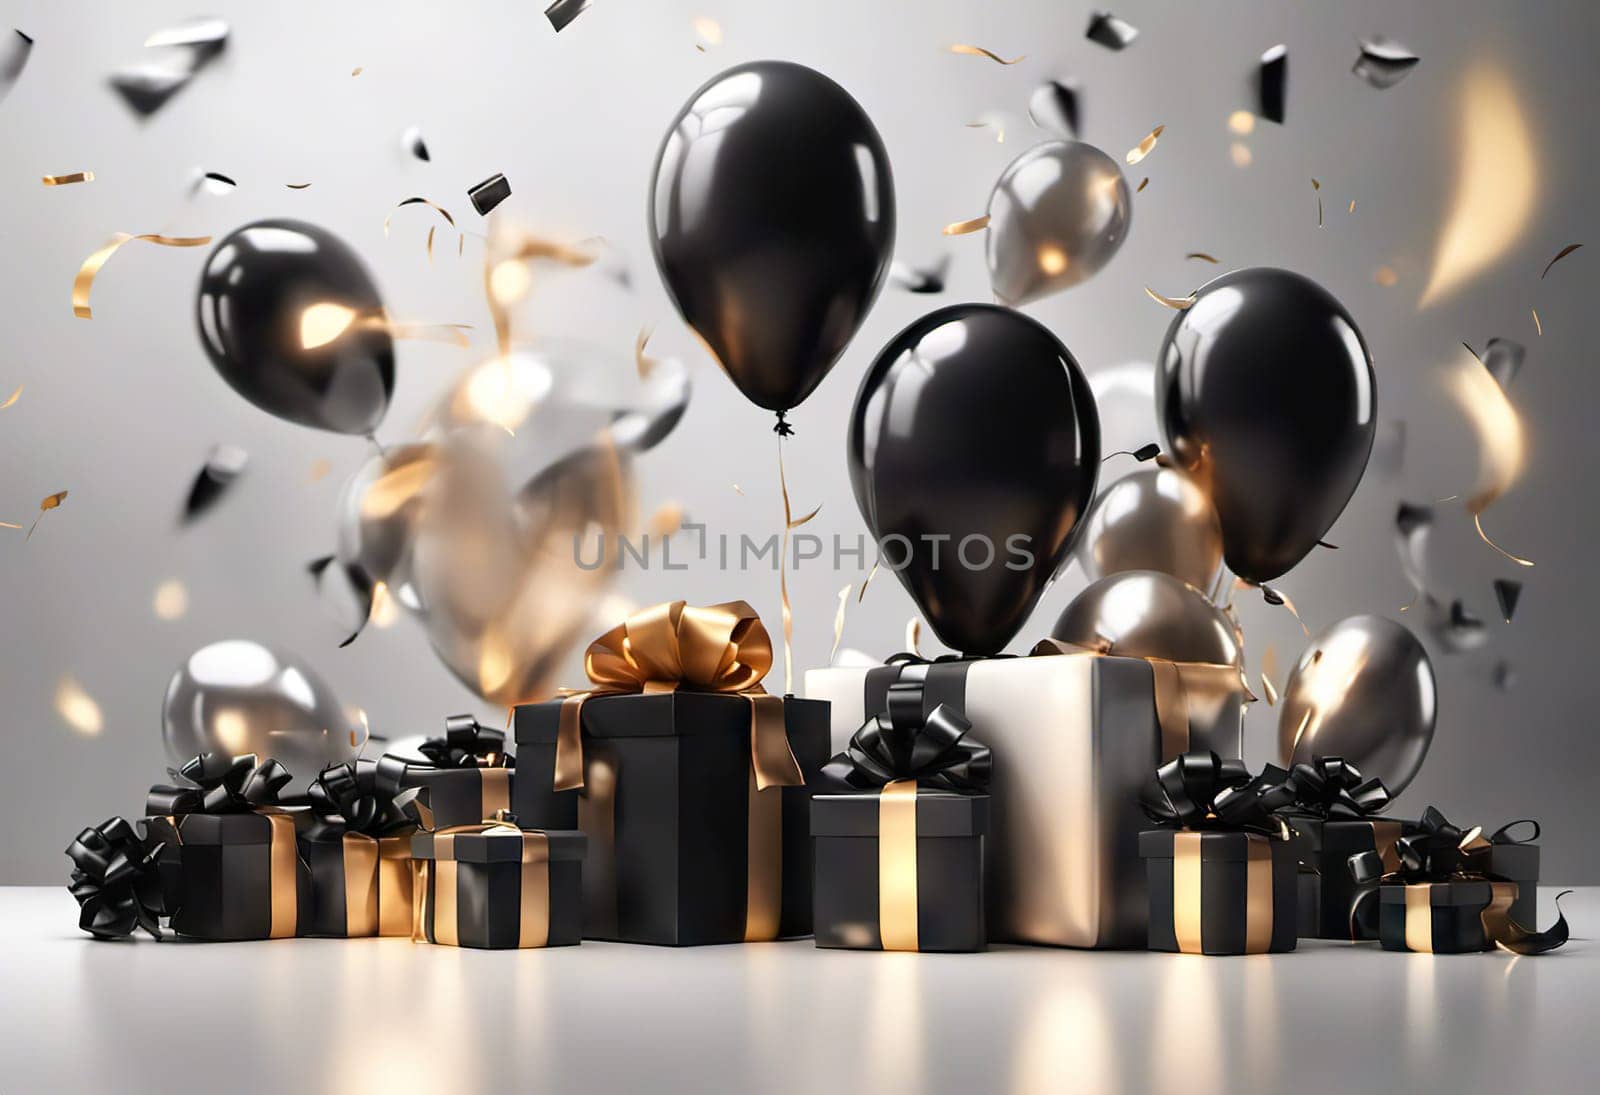 boxes with gifts and balloons and confetti on background, festive concept for birthday or black friday discounts by EkaterinaPereslavtseva